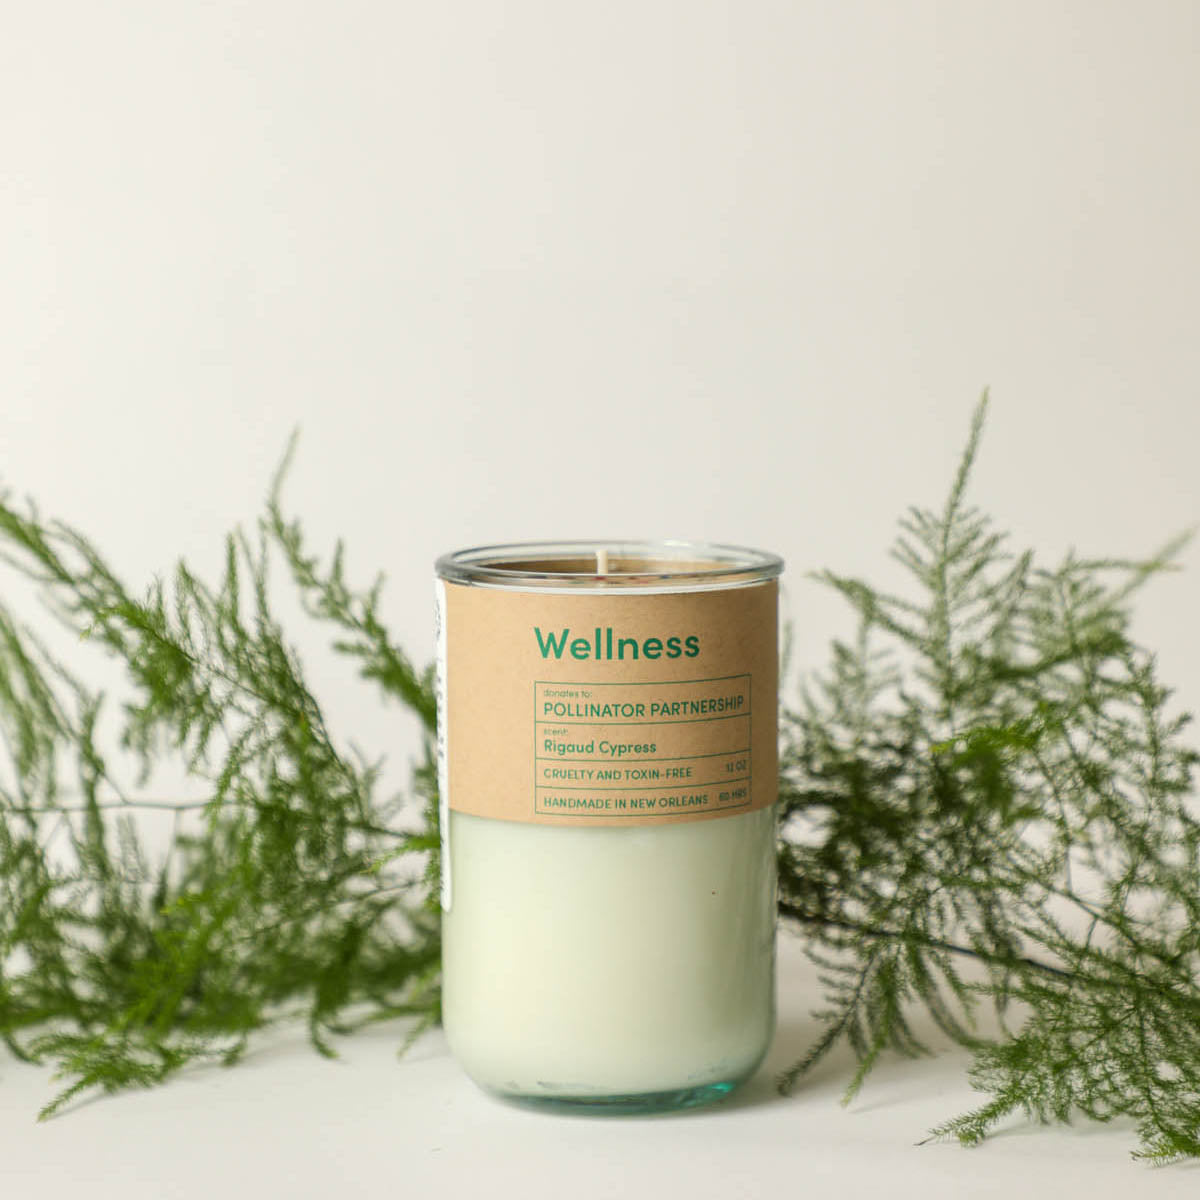 Wellness / Rigaud Cypress Scent: Candles for Good